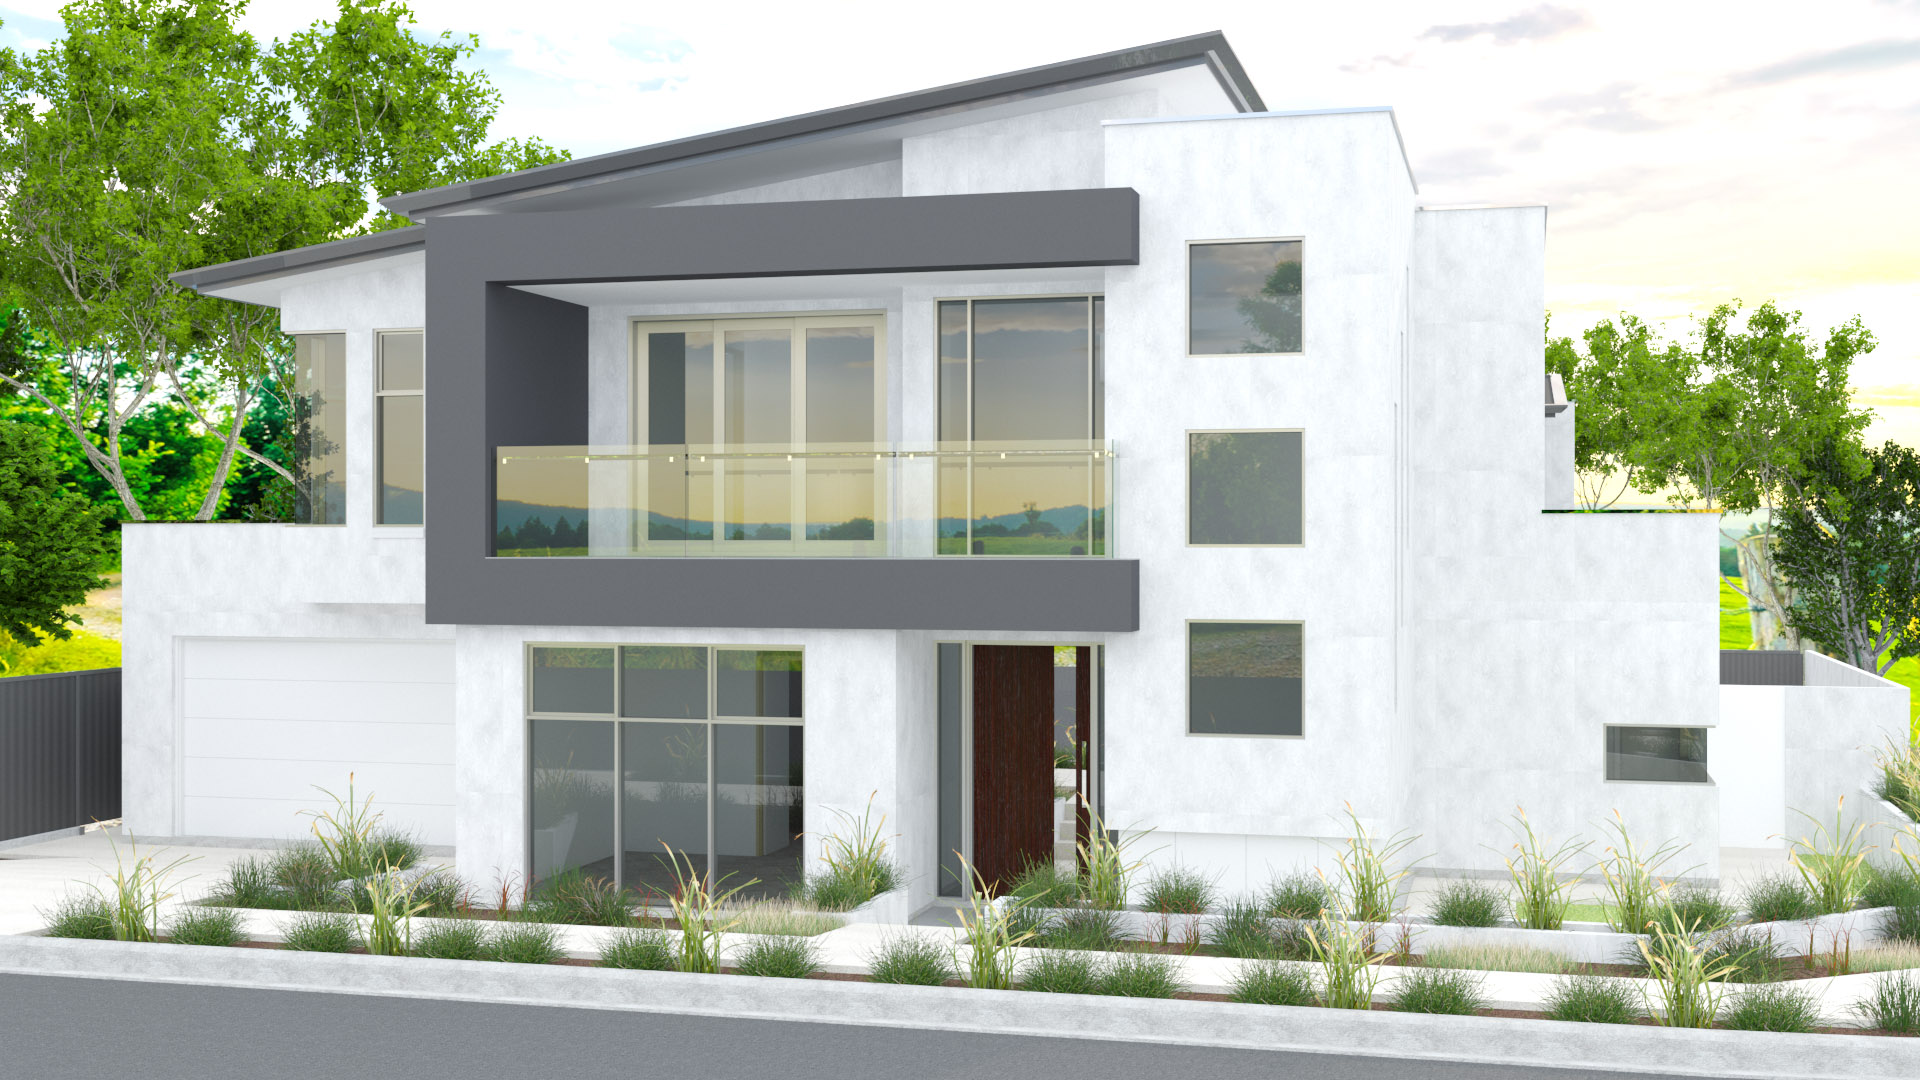 House and Land Developments Adelaide